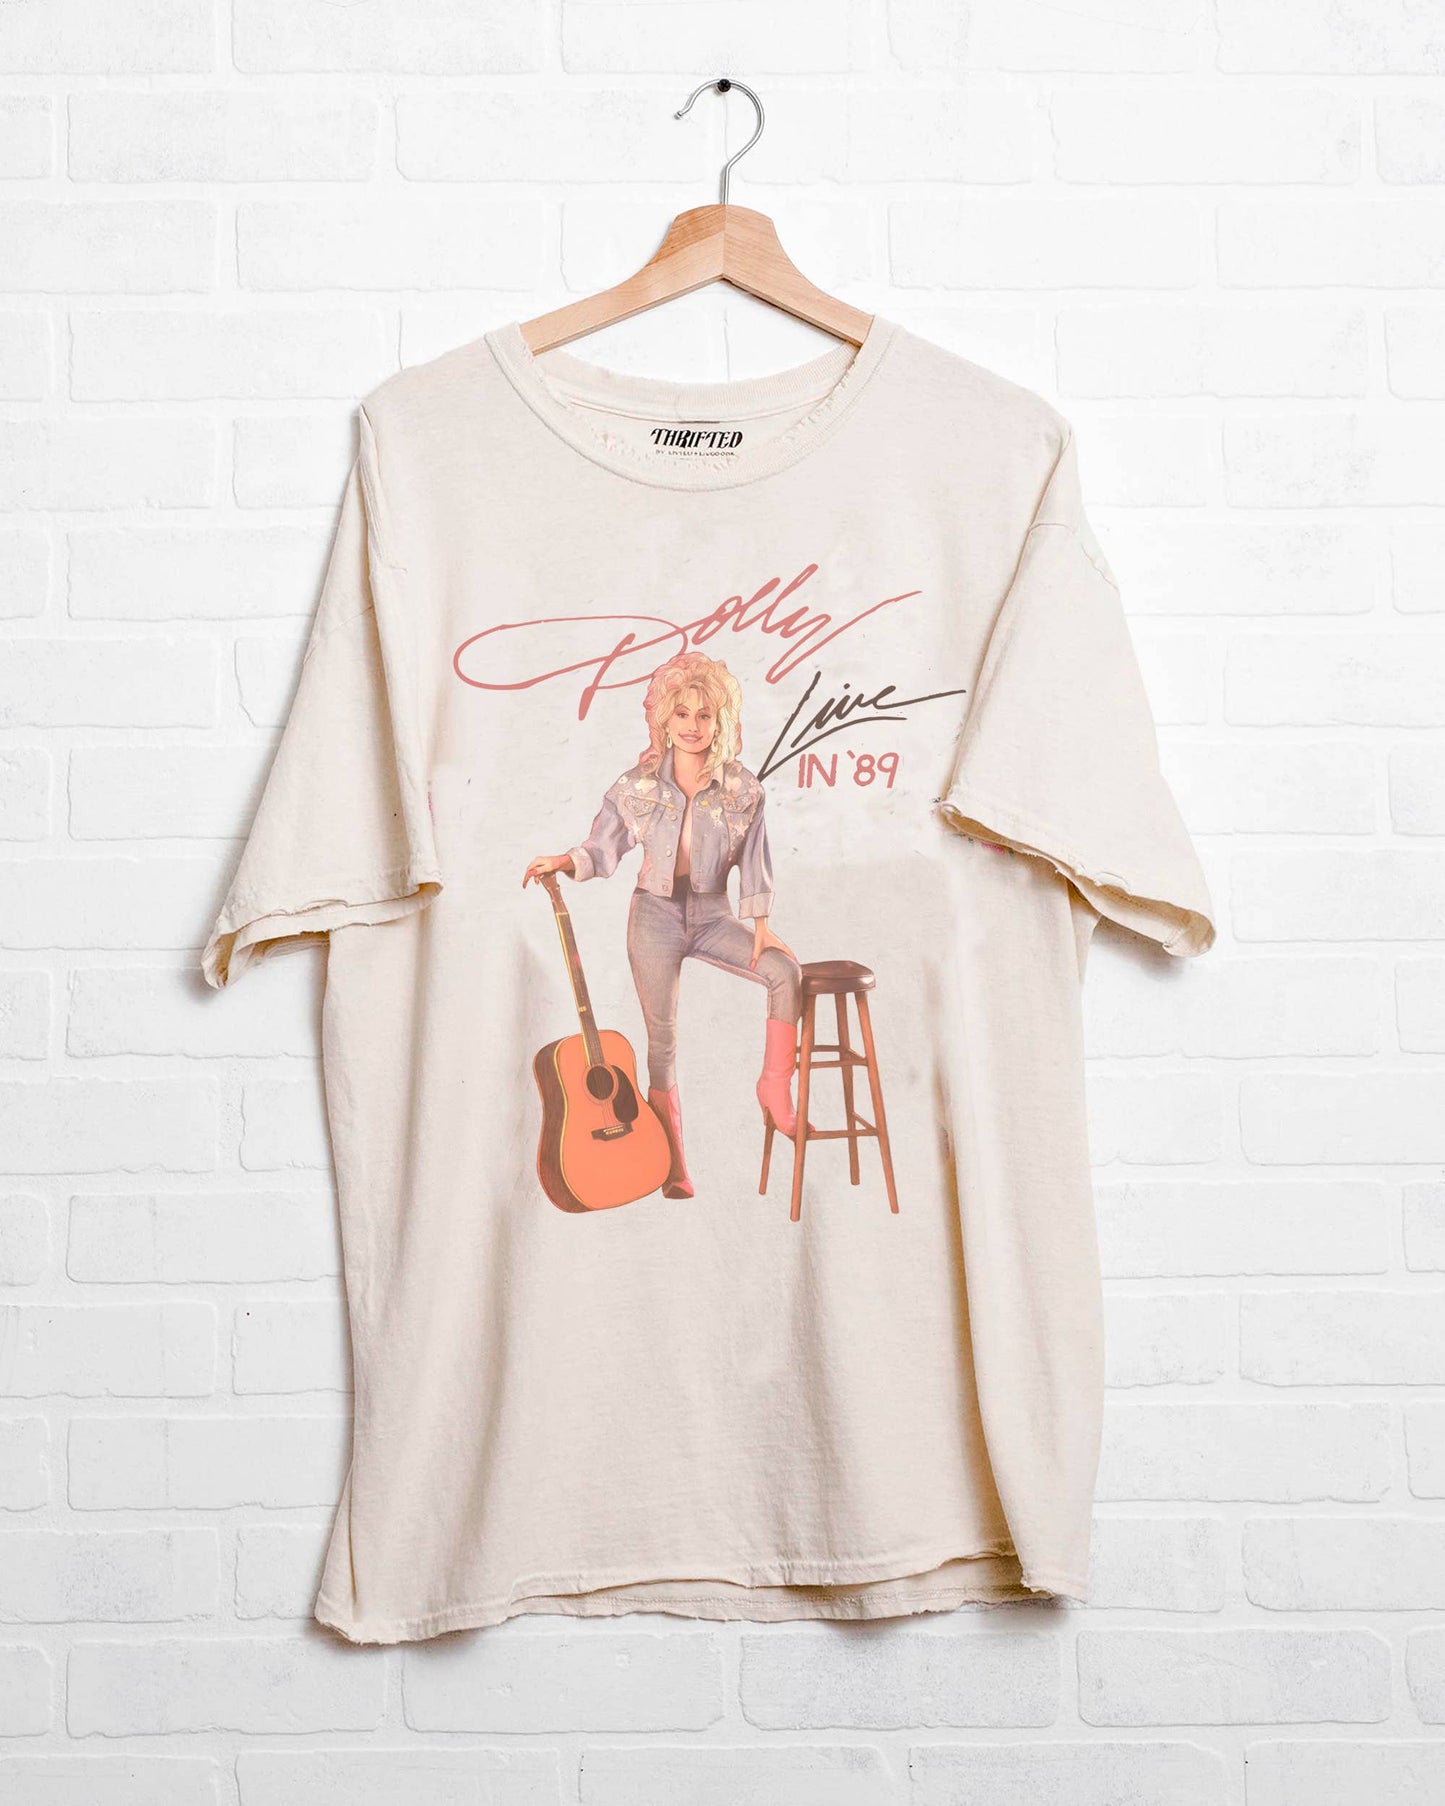 Dolly Parton Live in '89 Off White Thrifted Graphic Tee